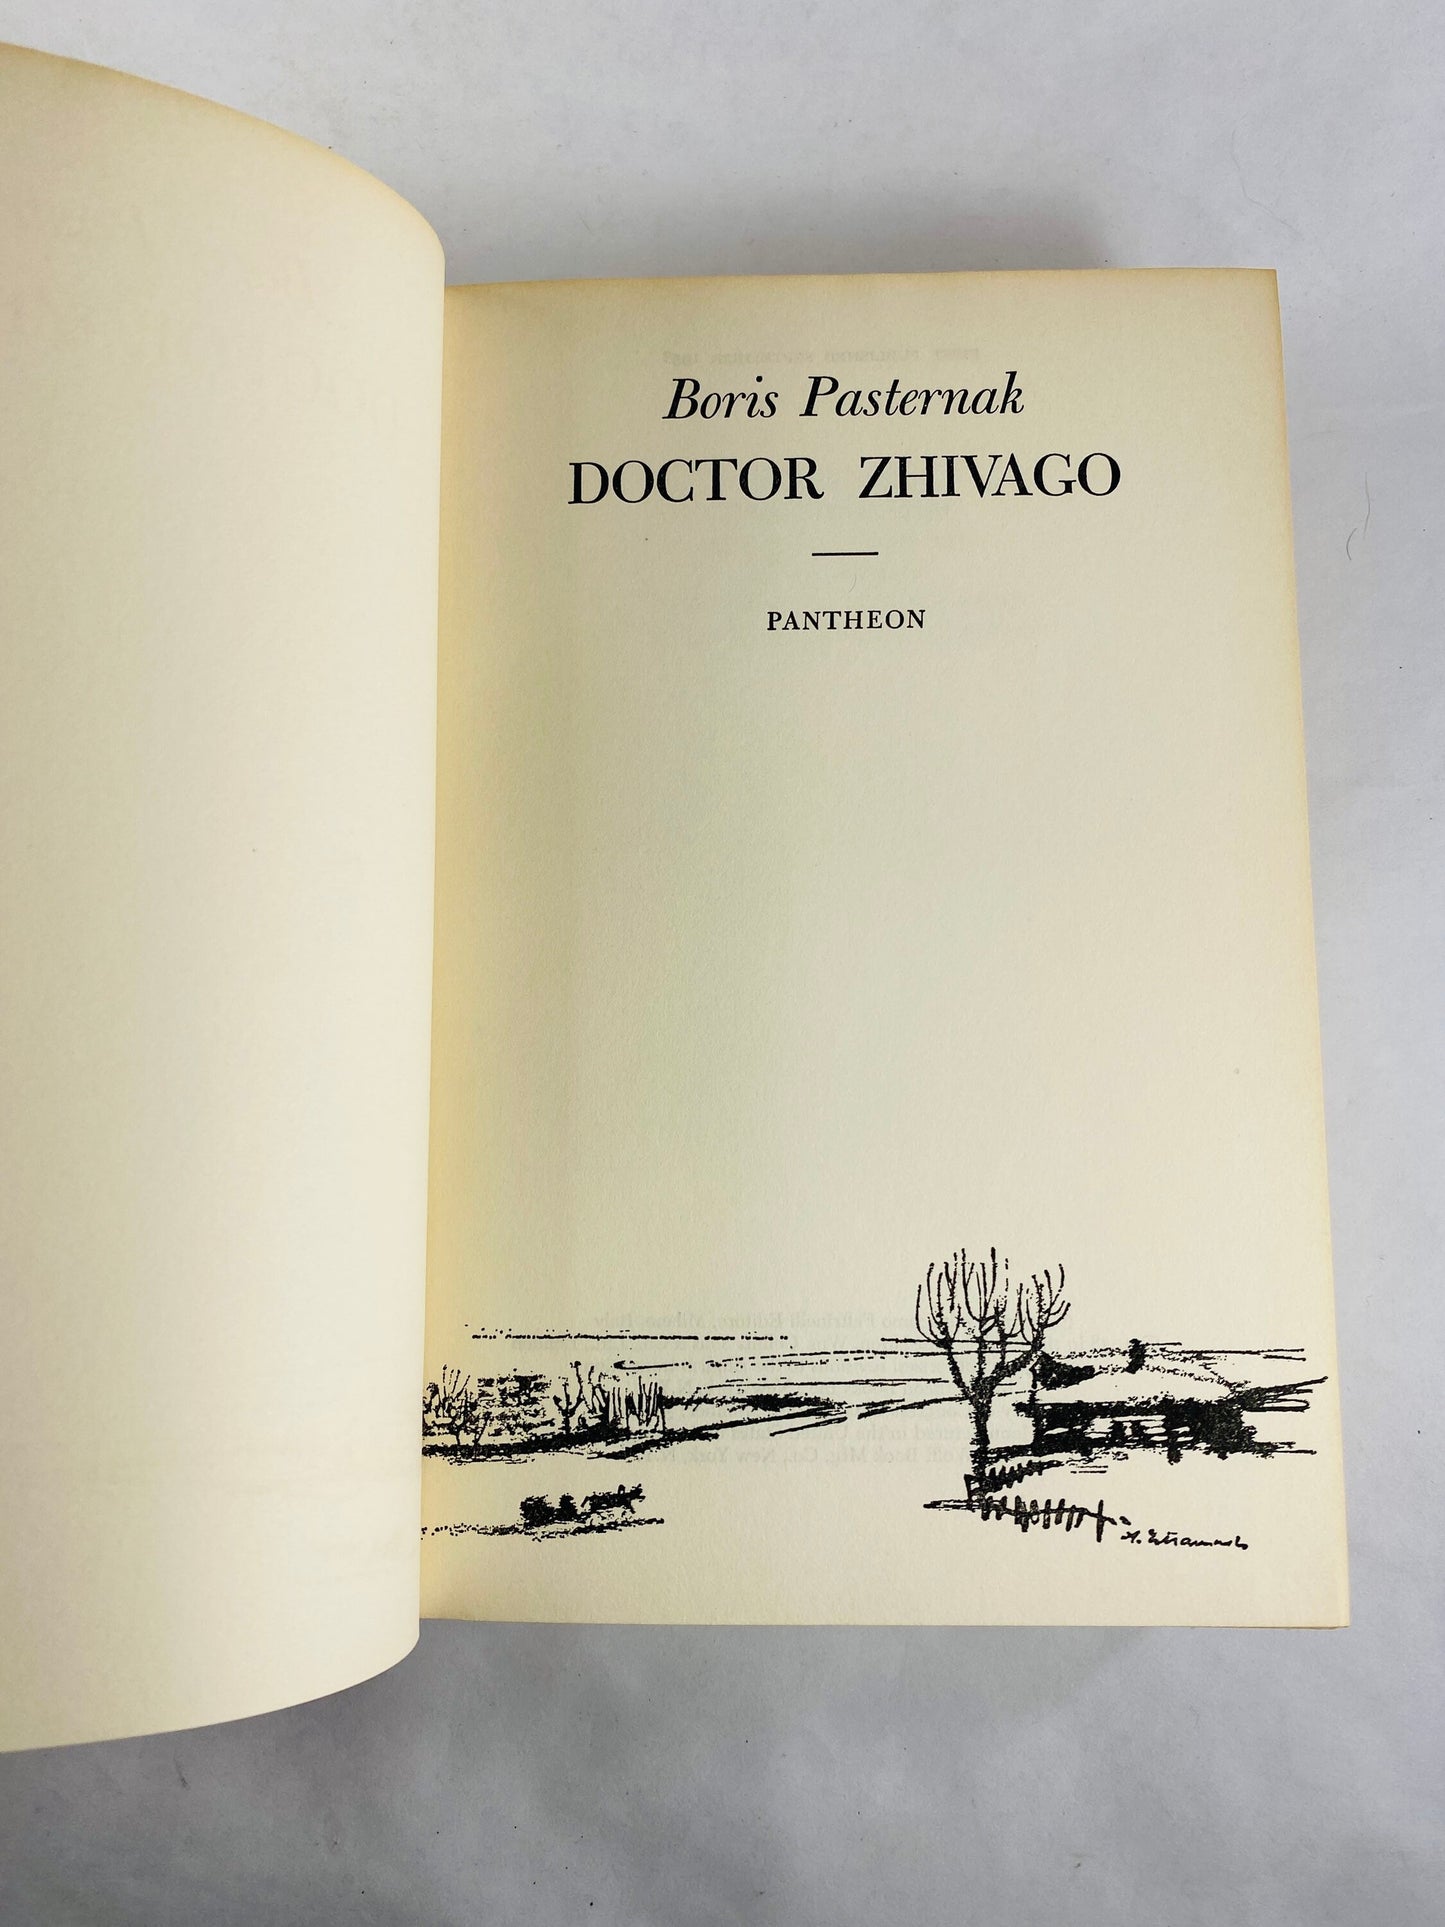 1958 Doctor Zhivago book by Boris Pasternak vintage book Early Printing Red home bookshelf decor. Love Story Affair